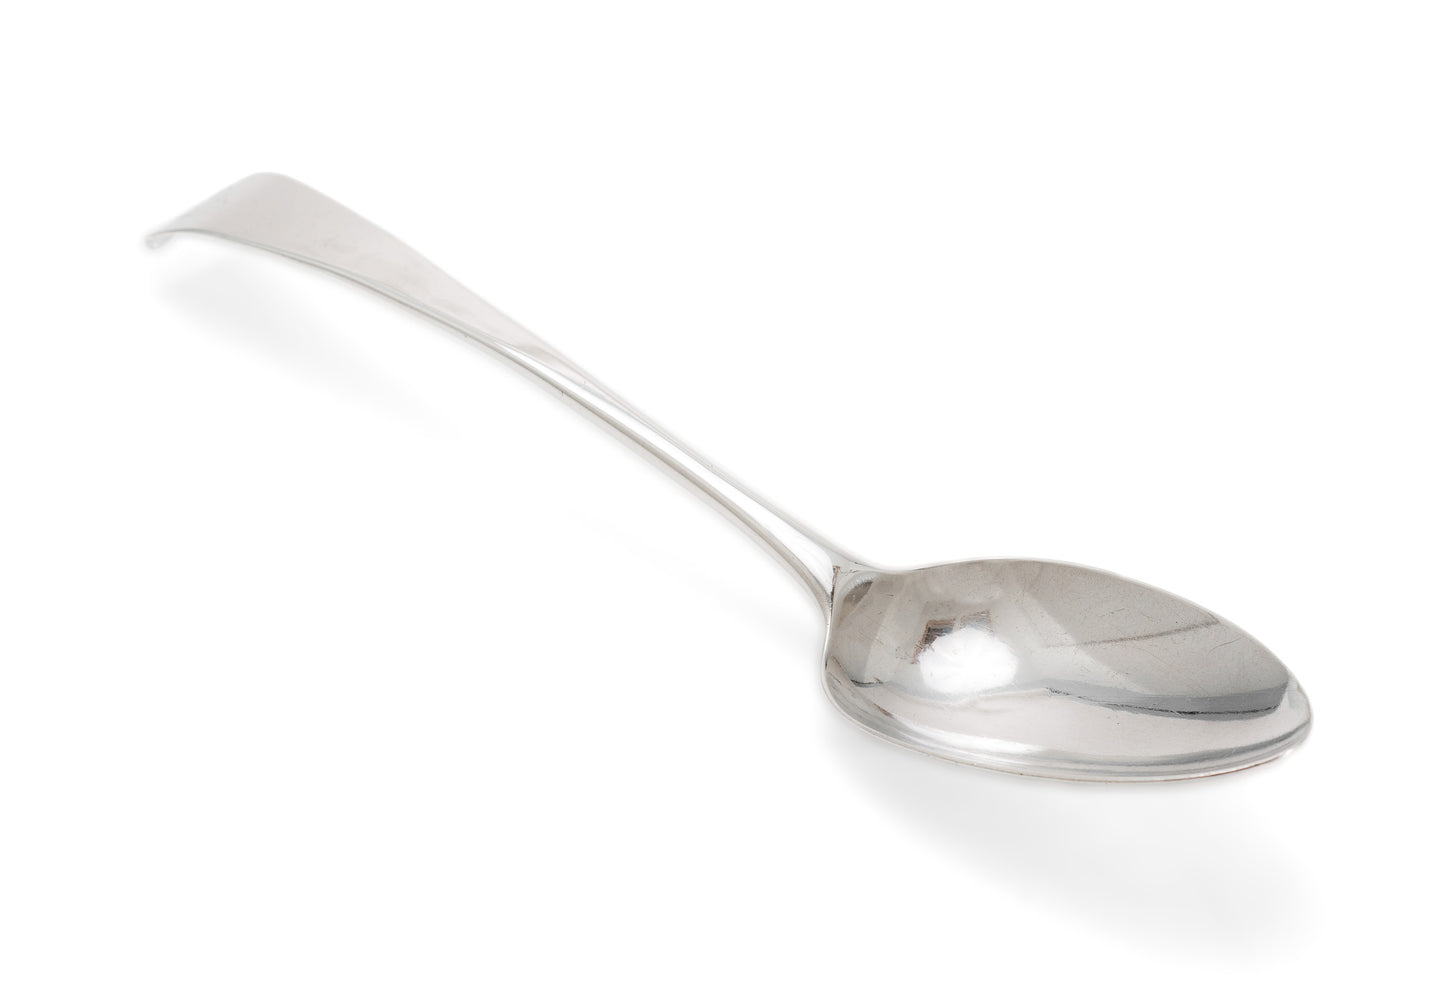 Antique George III Solid Silver Tablespoon by Hester Bateman - London 1787 (Code 2144)